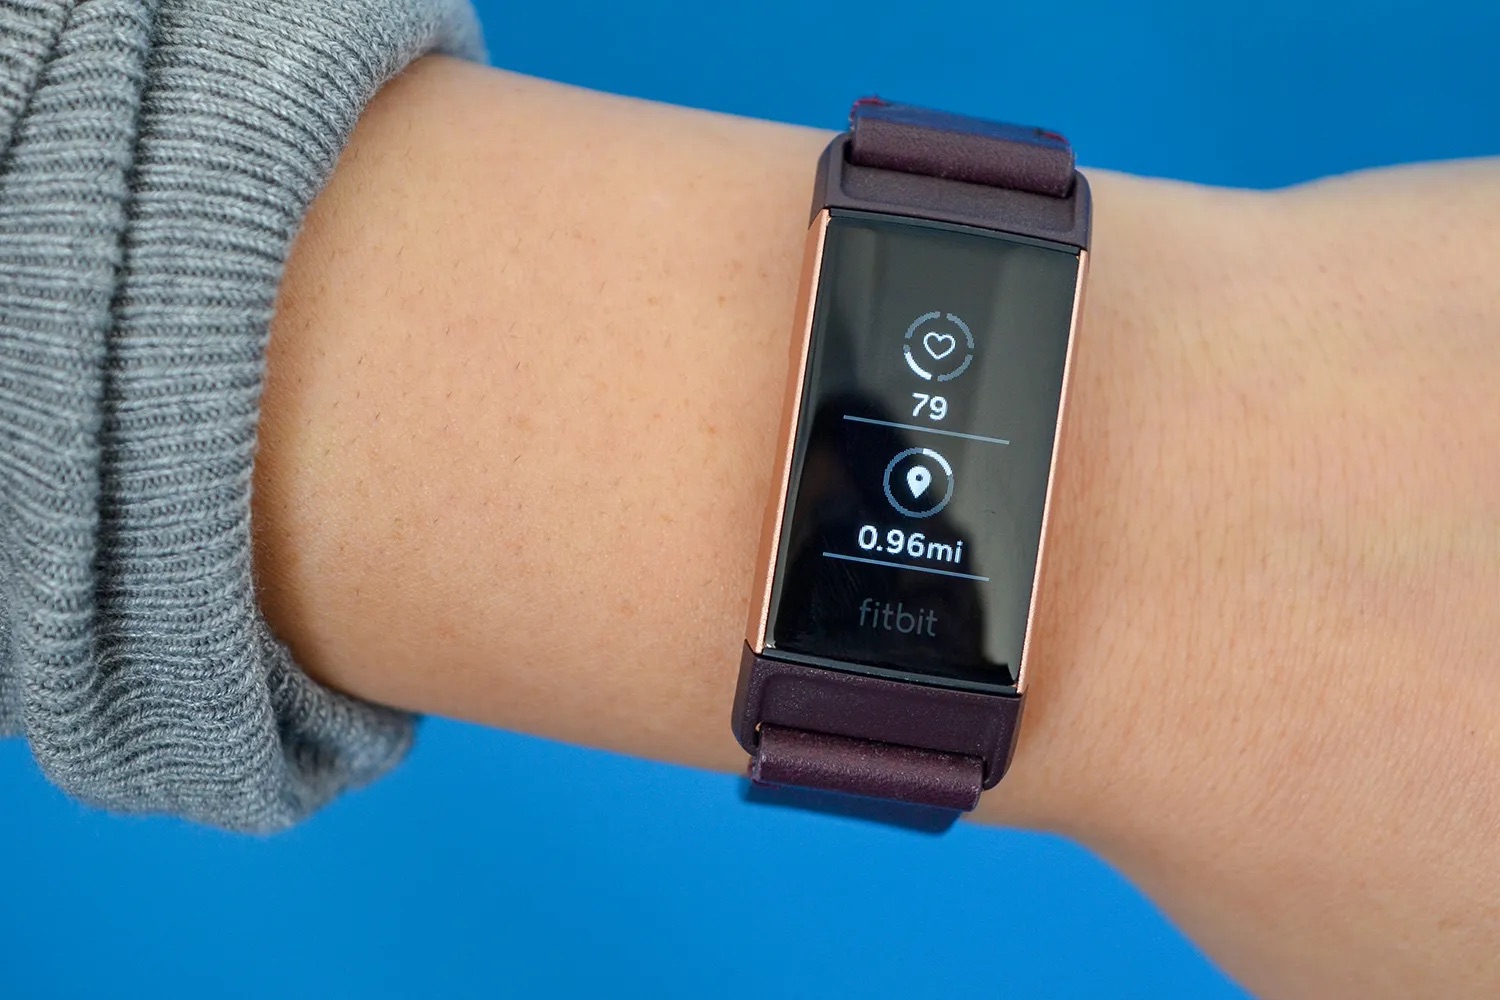 Power Check: Verifying The Charge Status Of Fitbit Flex